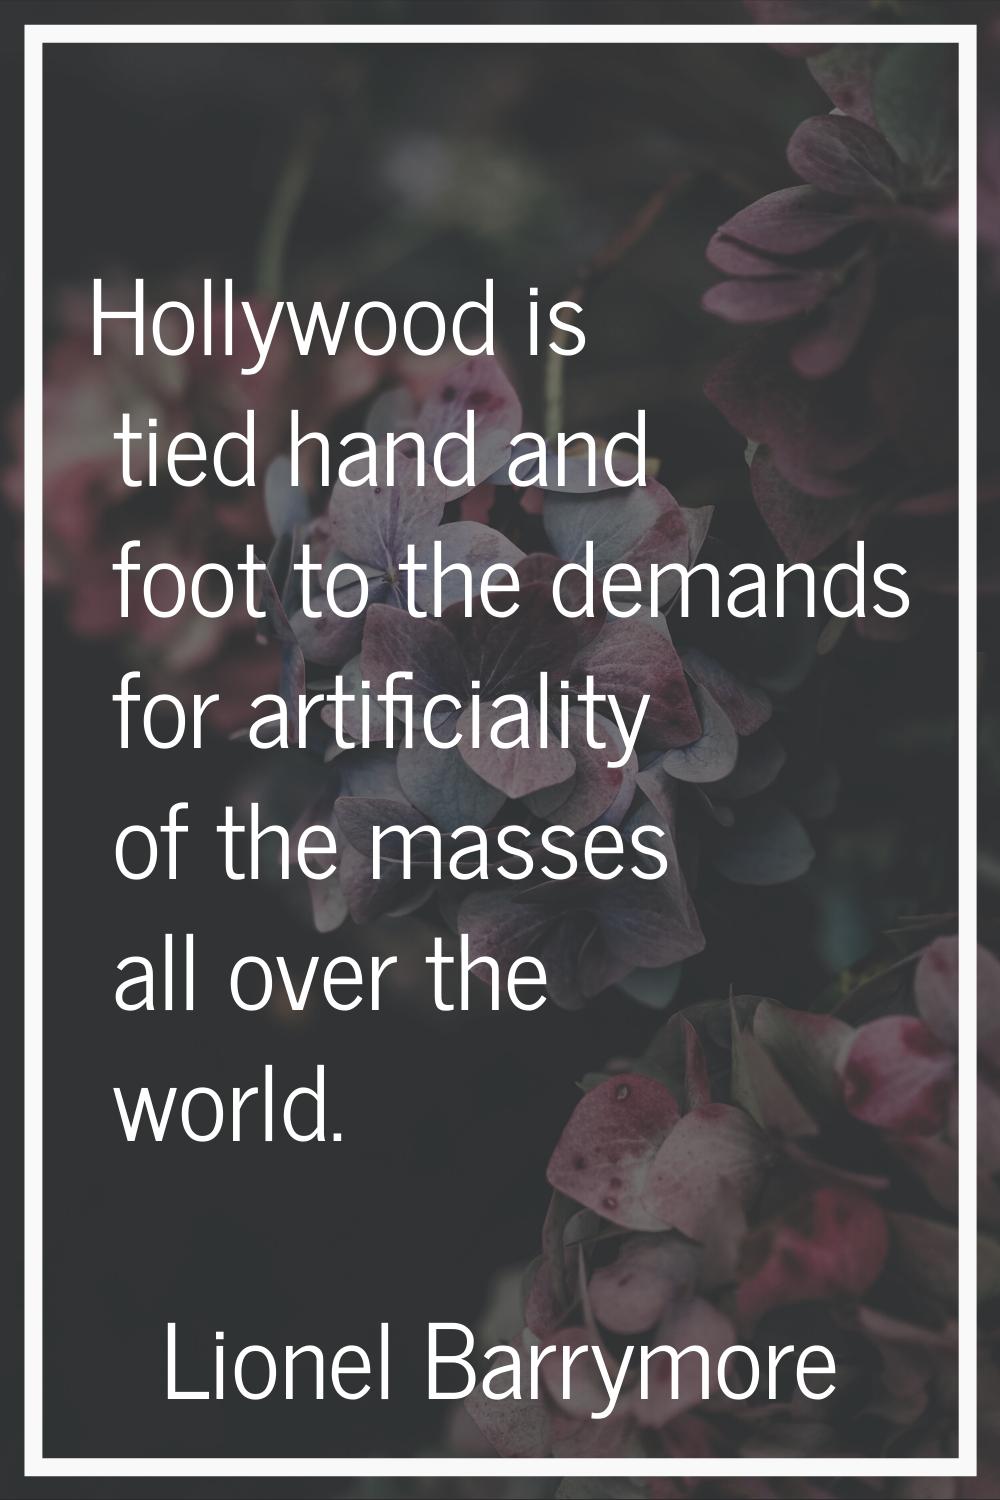 Hollywood is tied hand and foot to the demands for artificiality of the masses all over the world.